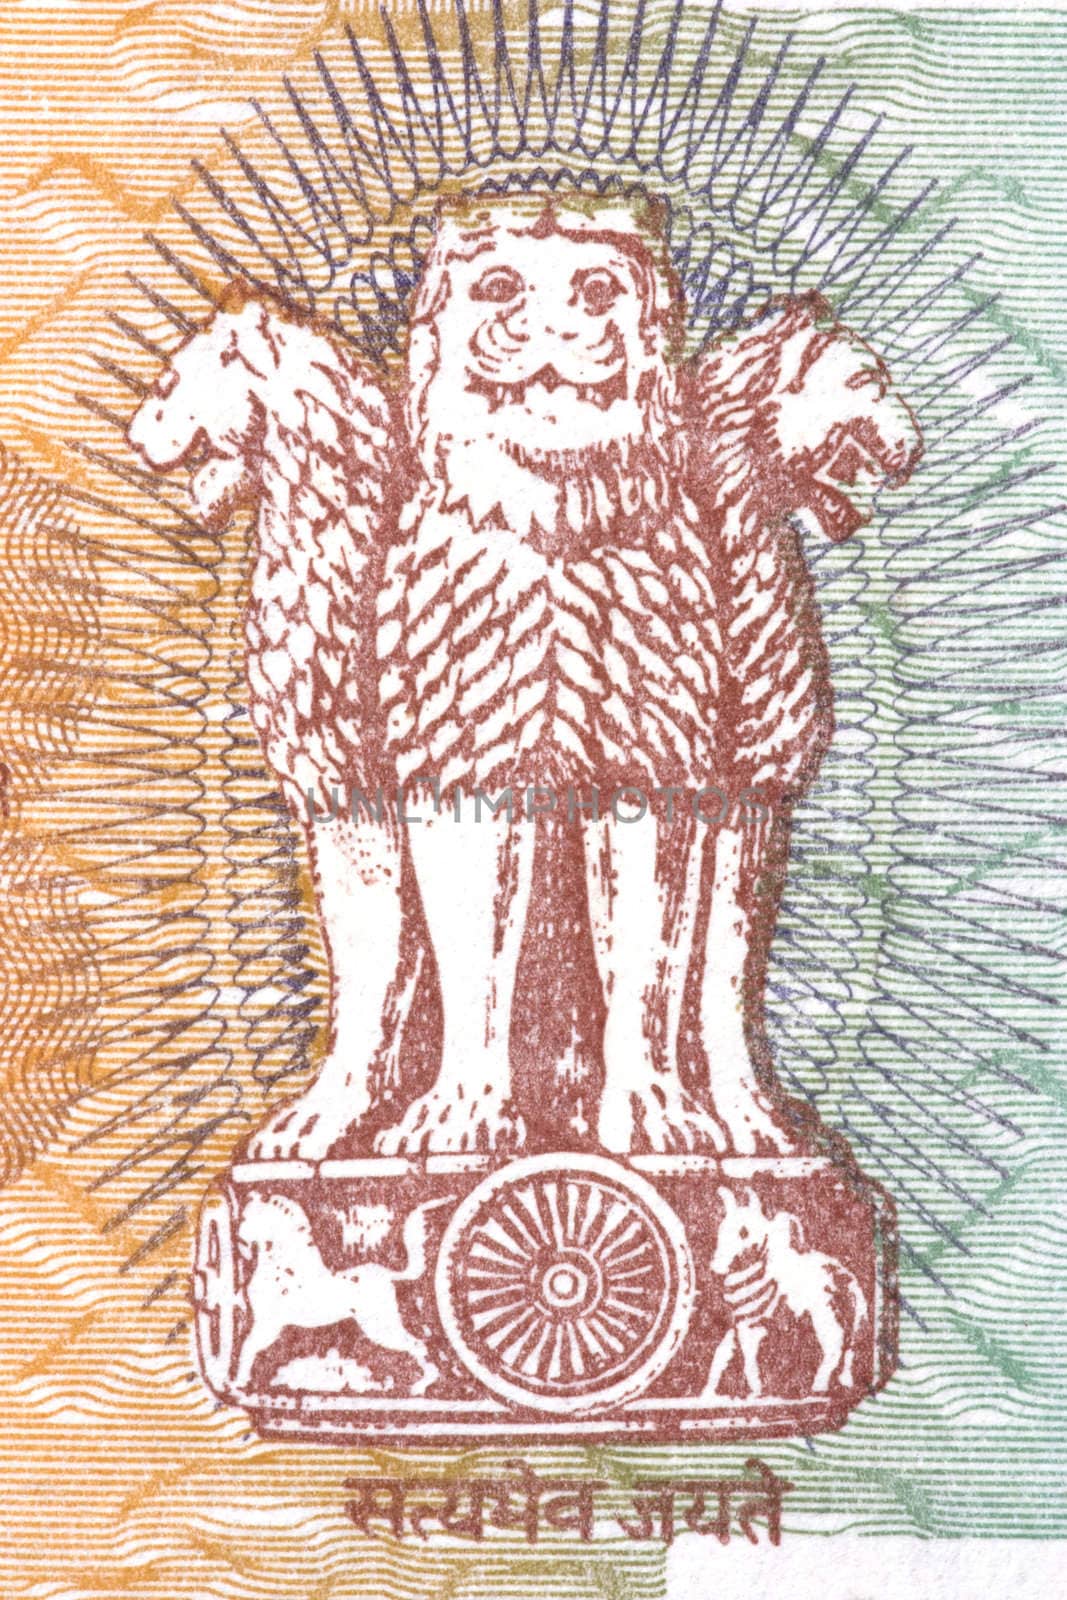 Macro image of the India Coat of Arms on a currency note.